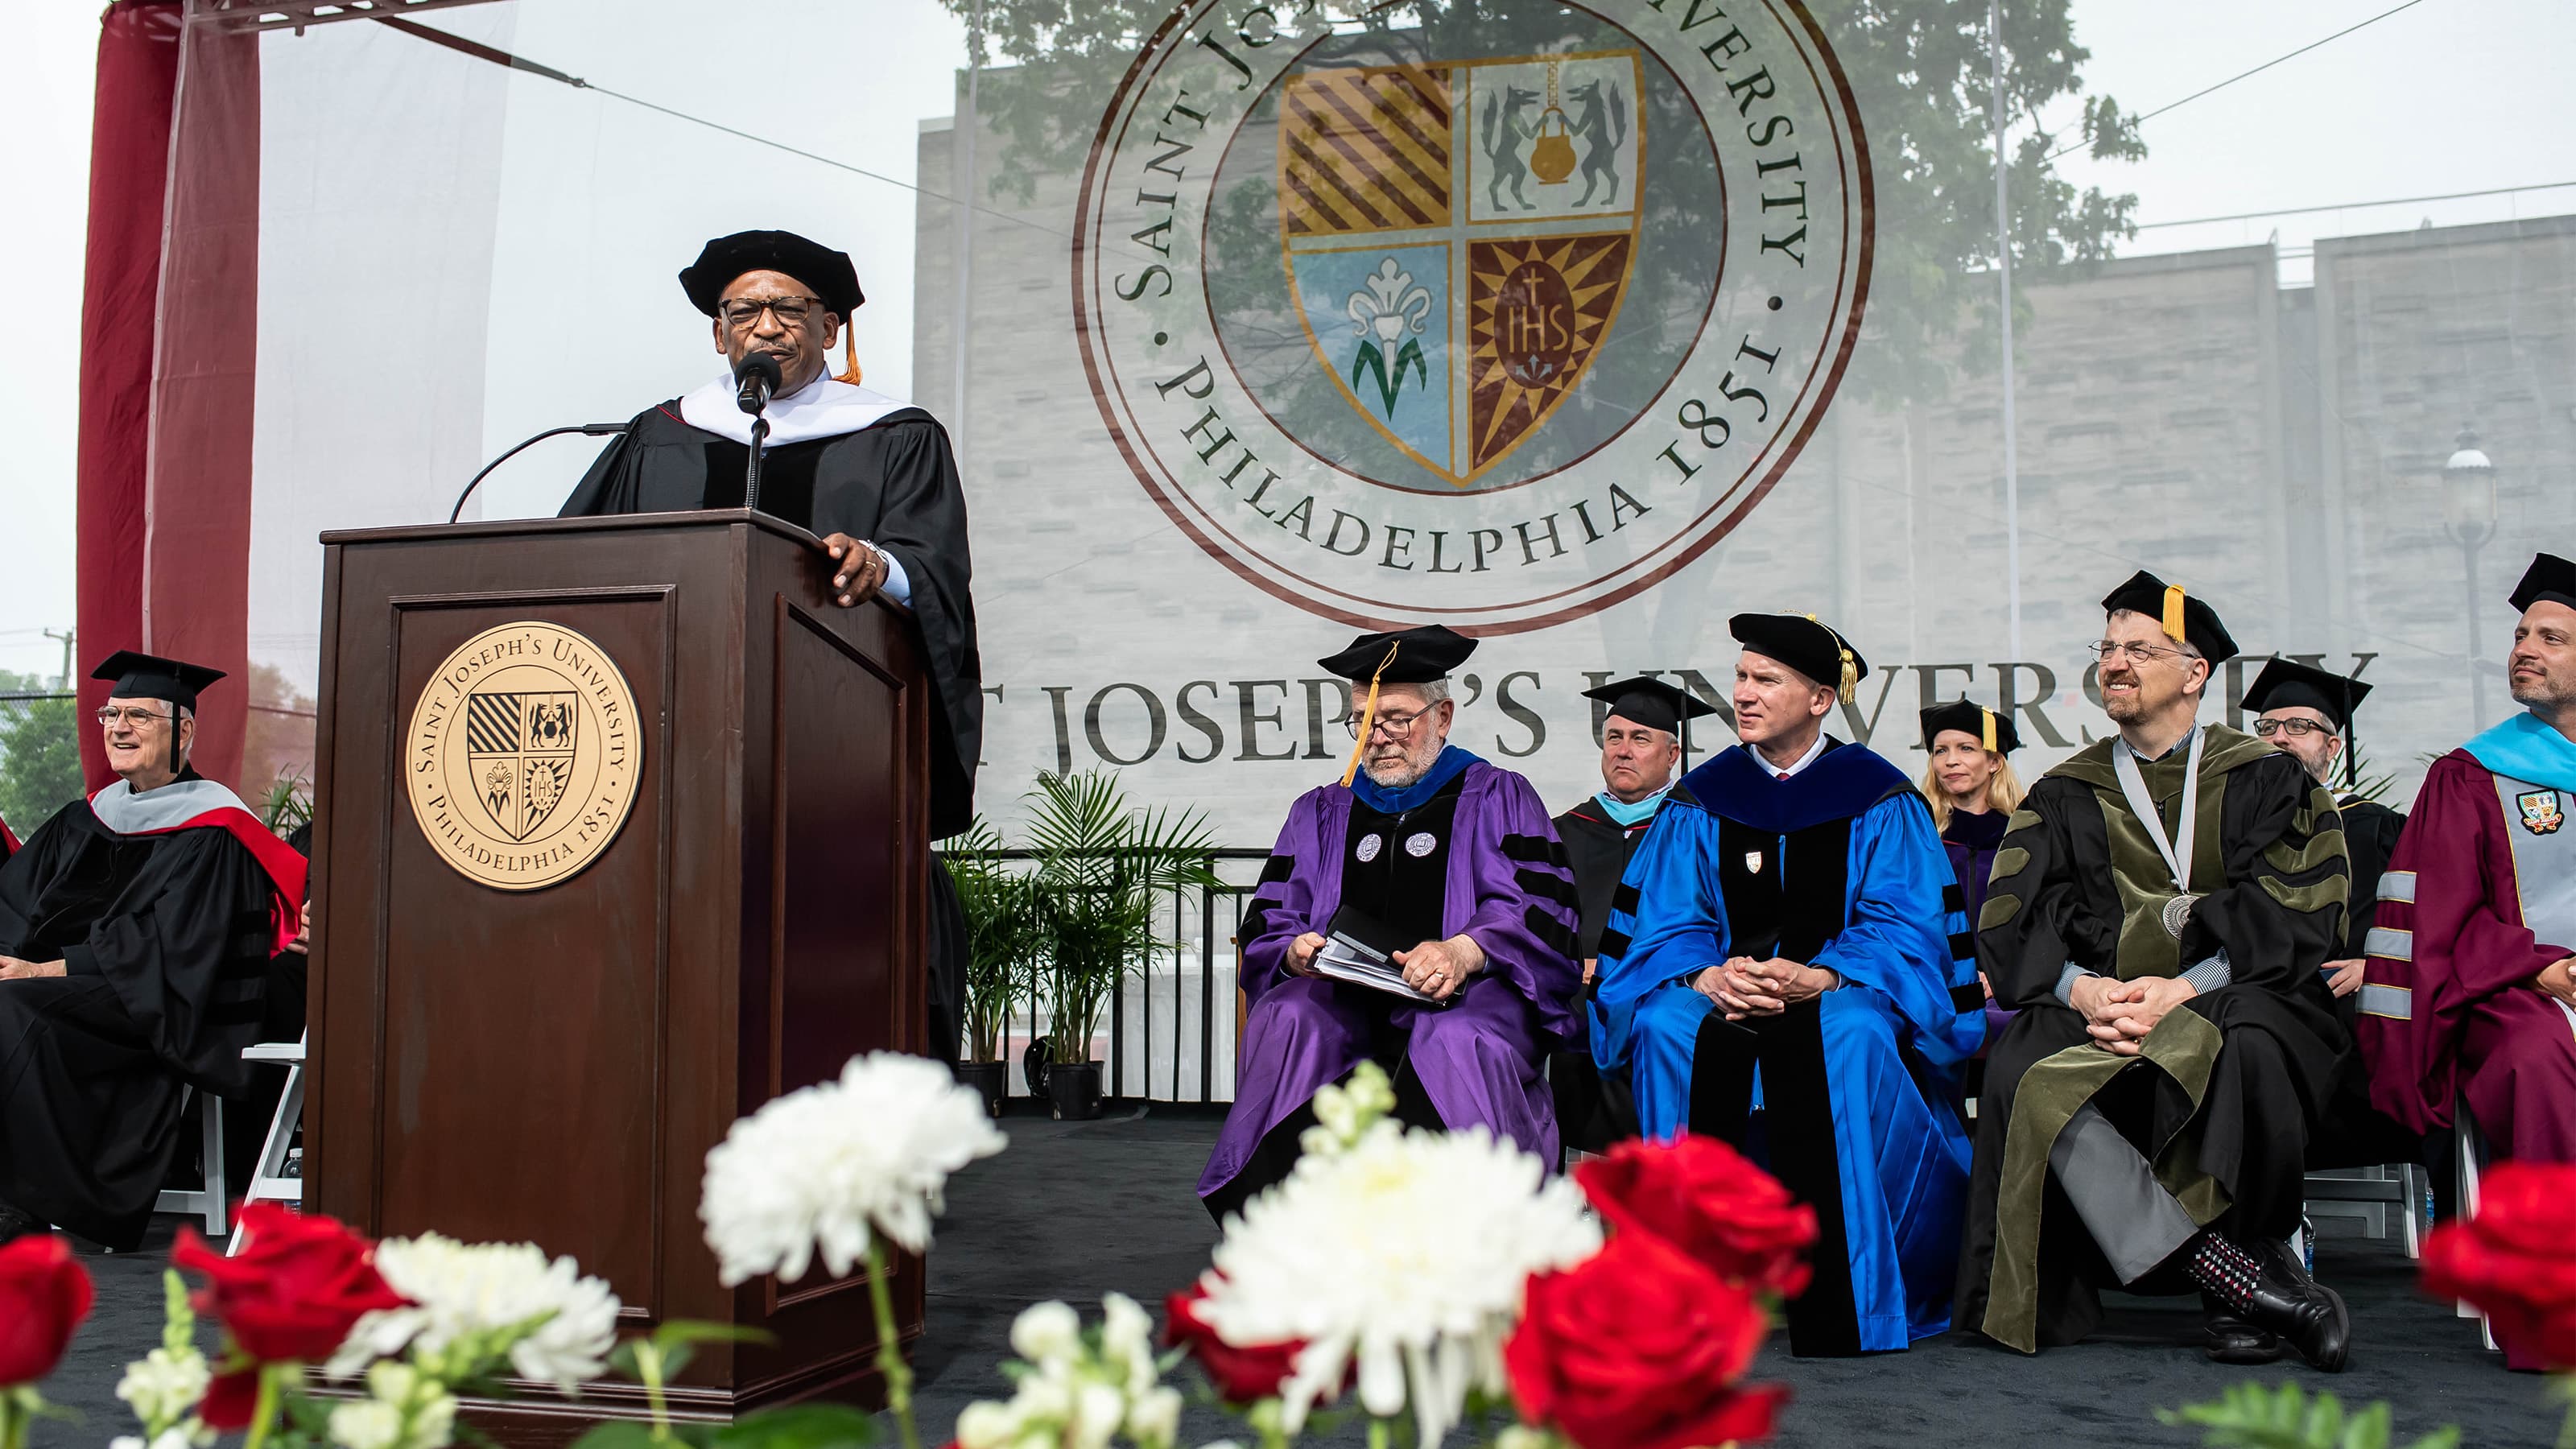 Speaker at podium at Commencement ceremony with faculty seated to the right